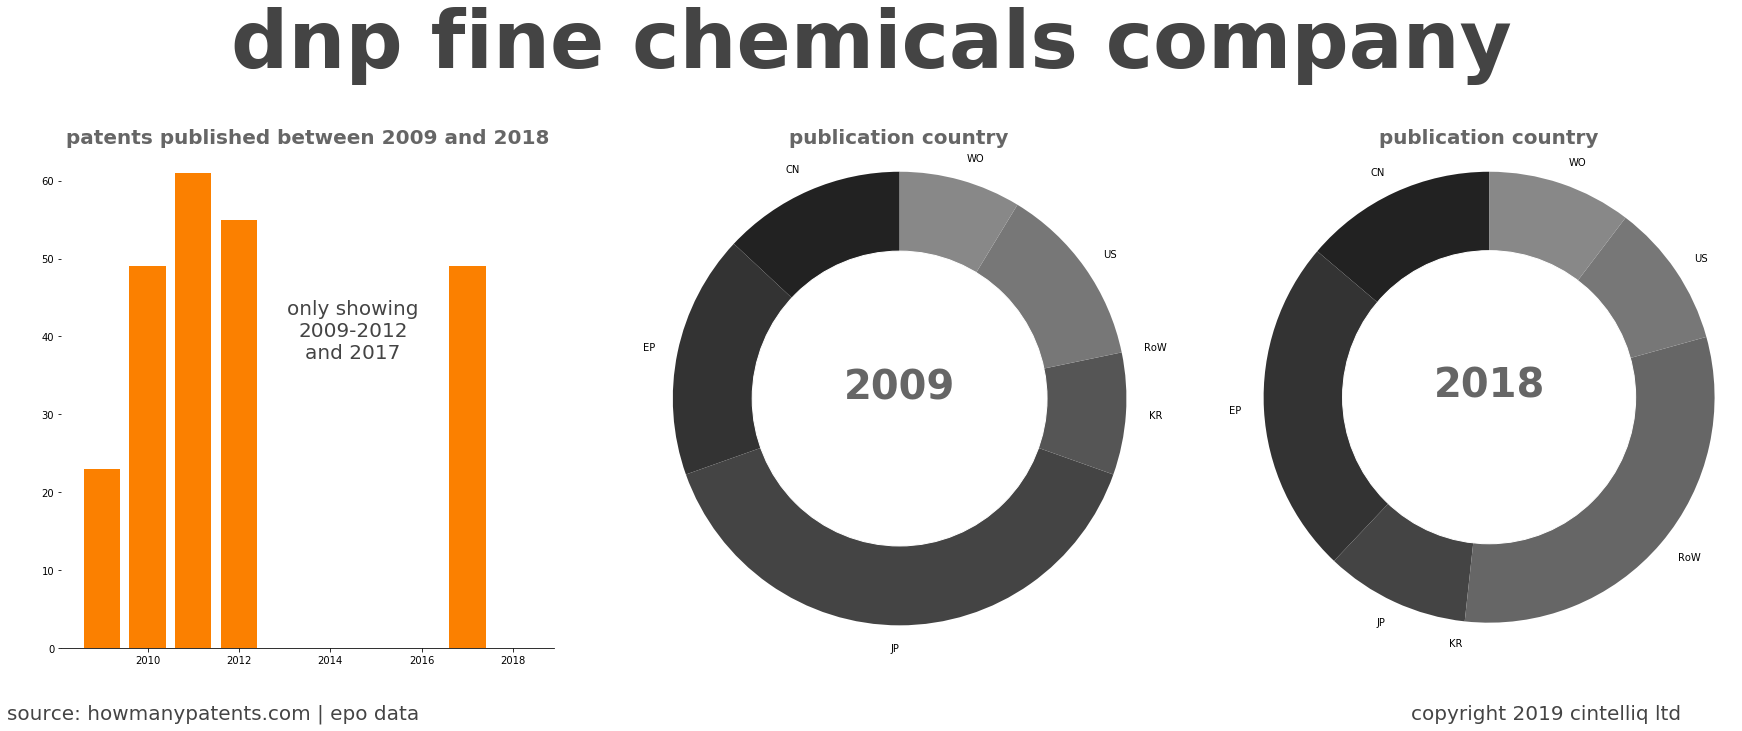 summary of patents for Dnp Fine Chemicals Company